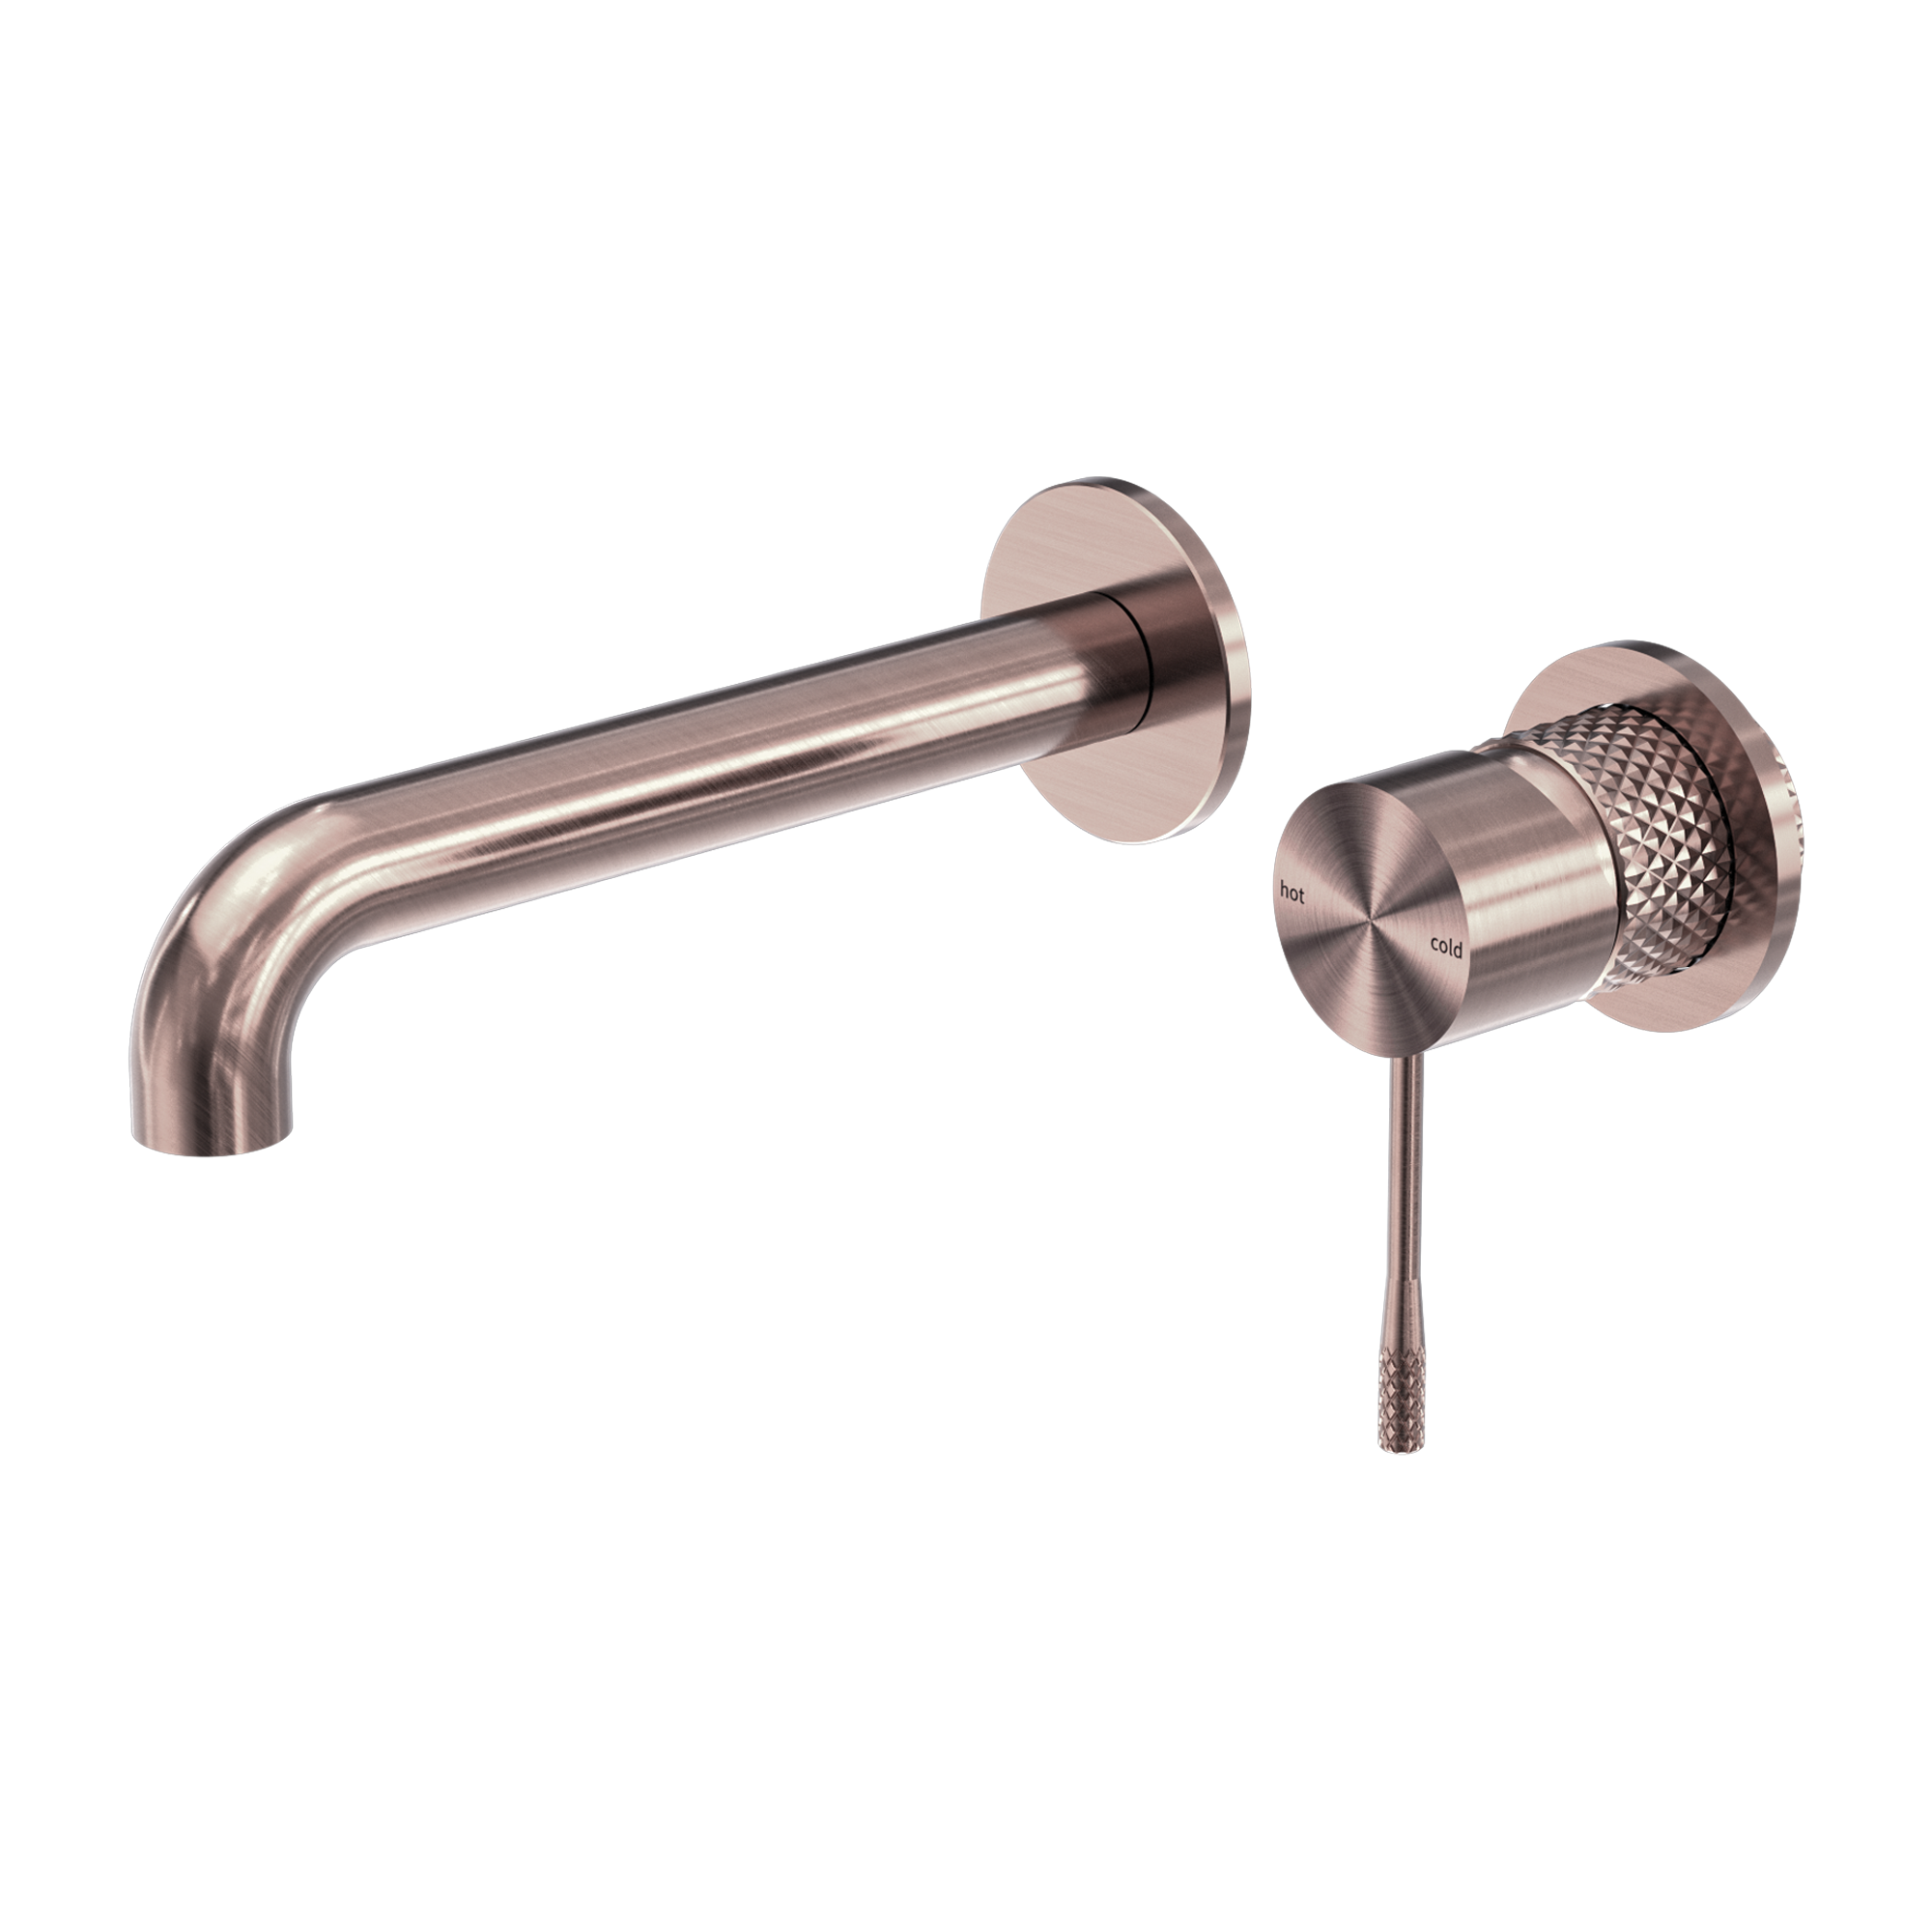 NERO OPAL WALL BASIN/ BATH MIXER SEPARATE BACK PLATE BRUSHED BRONZE (AVAILABLE IN 120MM, 160MM, 185MM, 230MM AND 260MM)